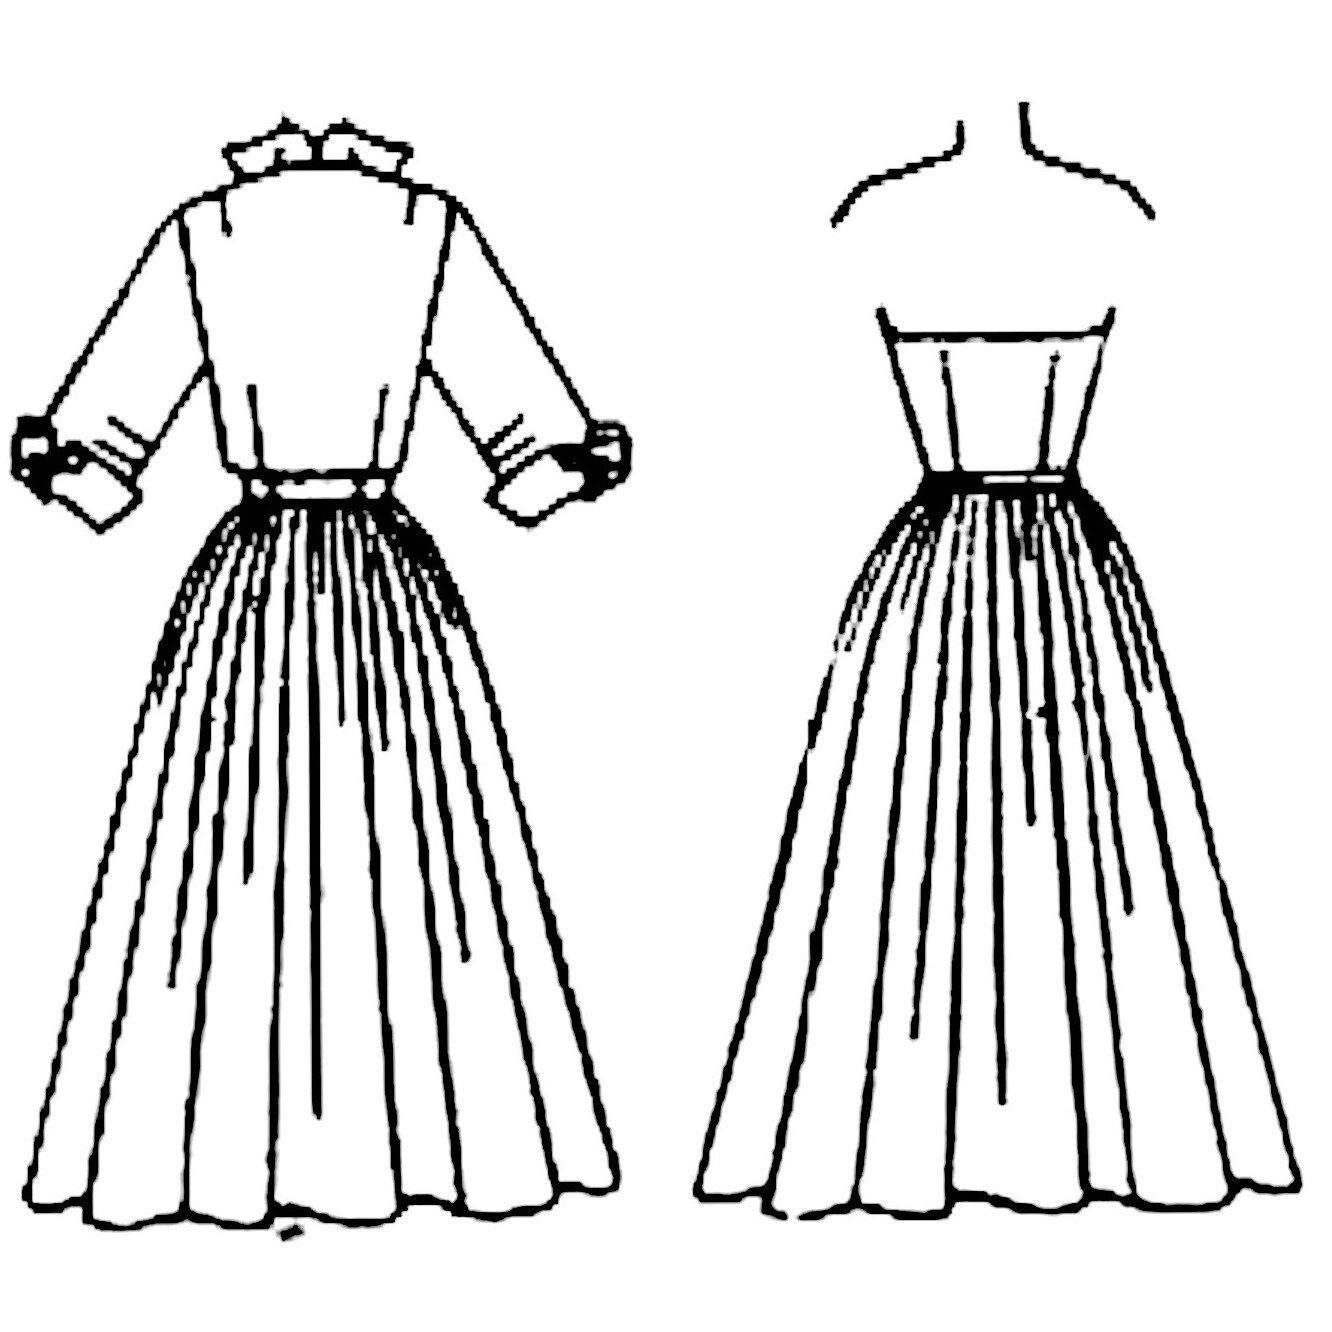 Line drawing of the dress